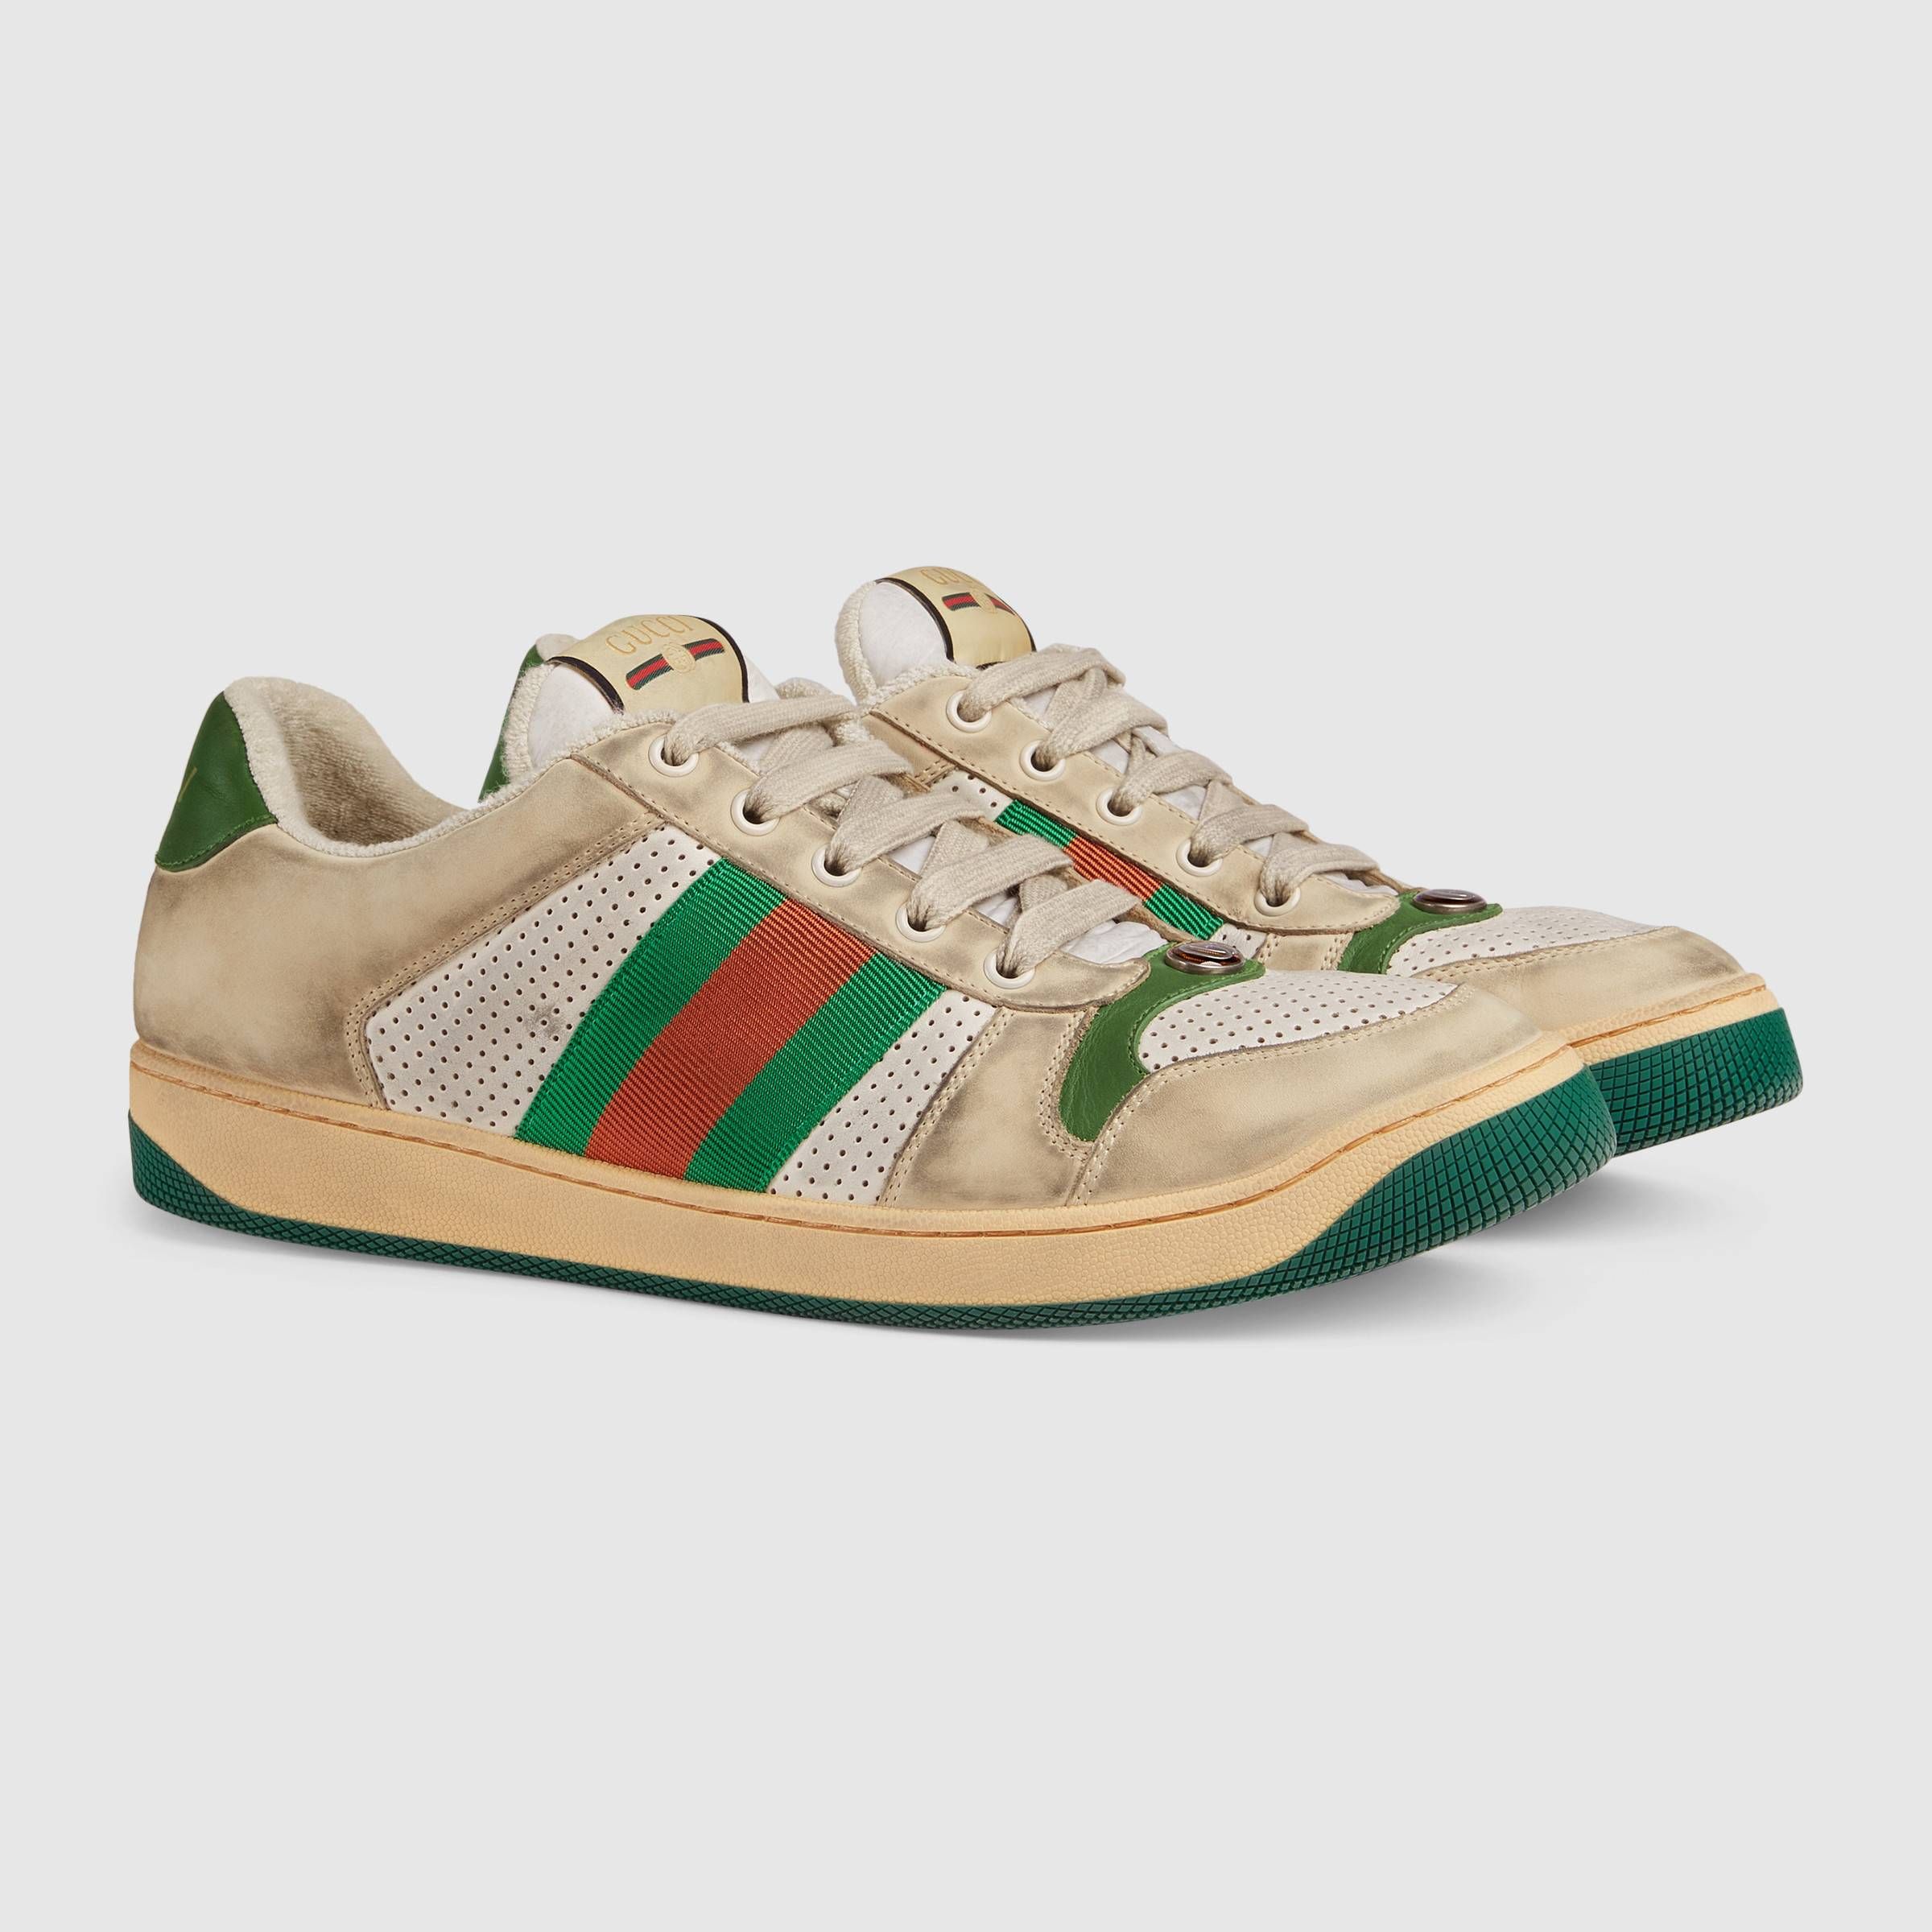 sneakers that look like gucci